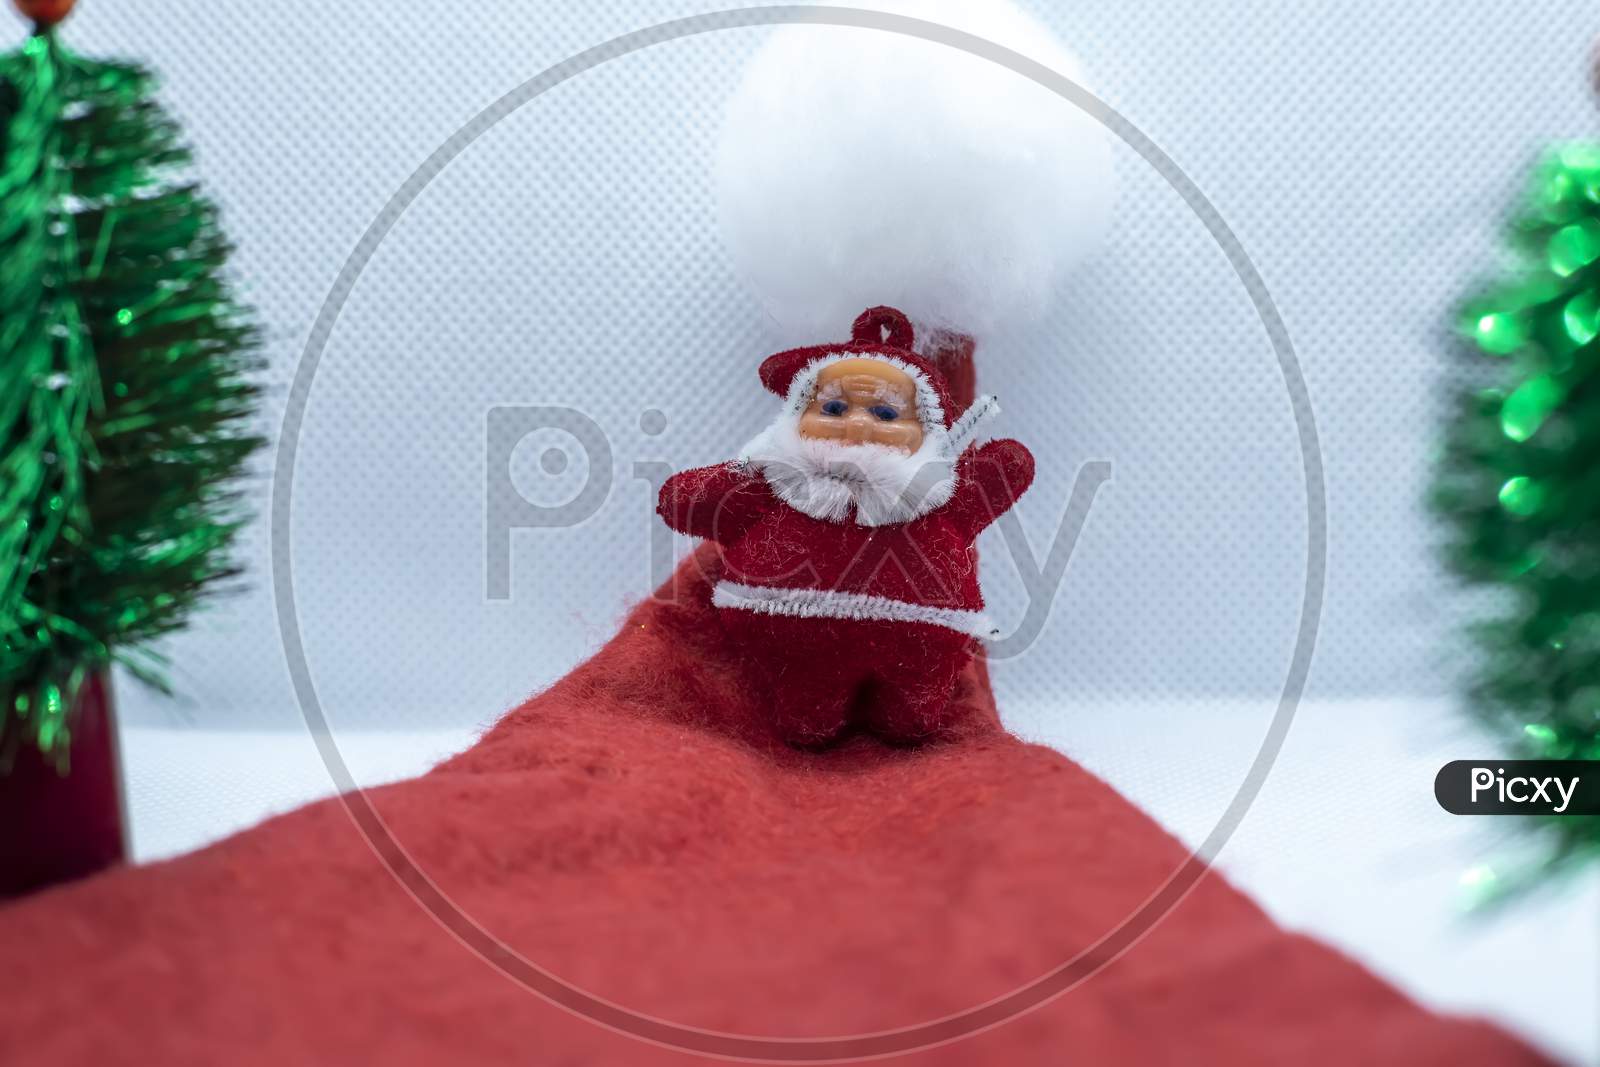 Santa Claus Stands In A Santa Claus Hat Near A Tree On A White Background